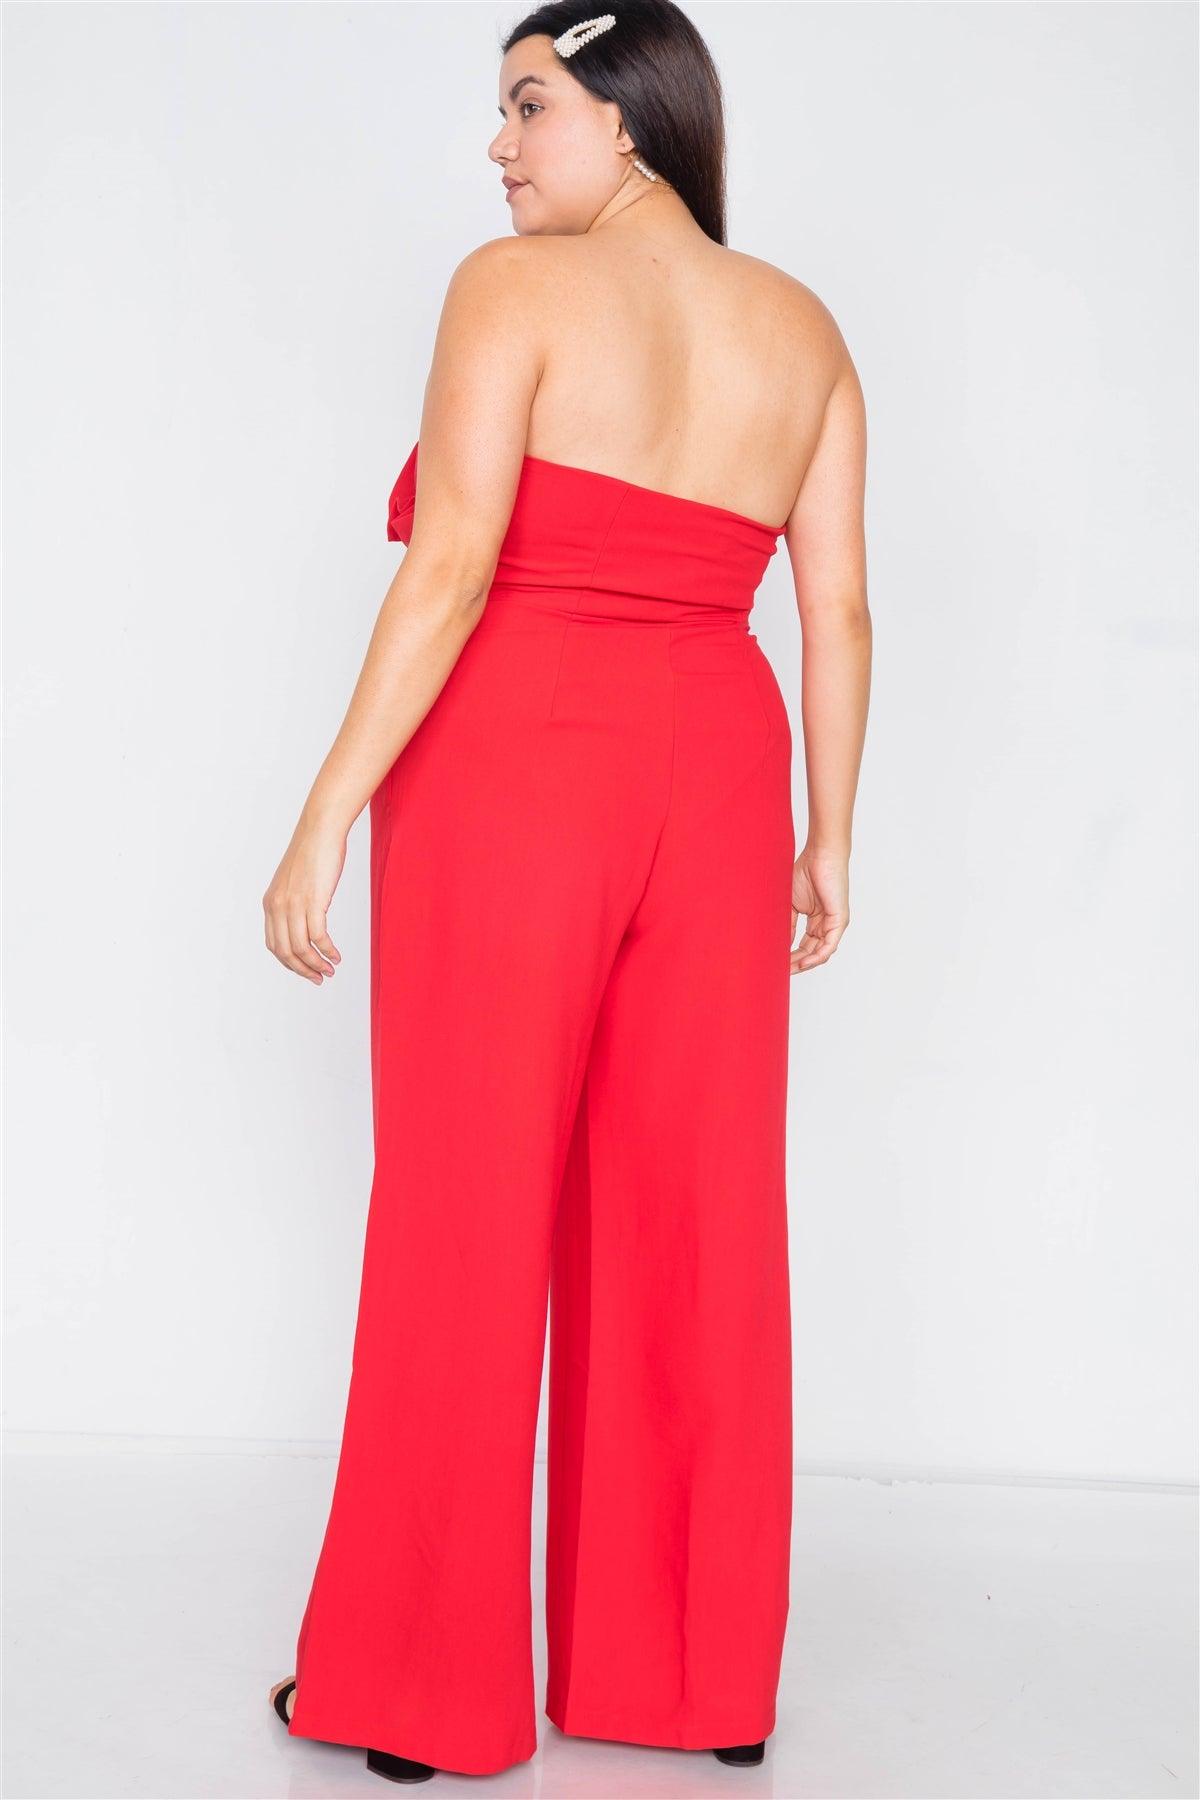 Junior Plus Size Red Tailored Frill Wide Leg Sleeveless Cocktail Jumpsuit /3-2-1